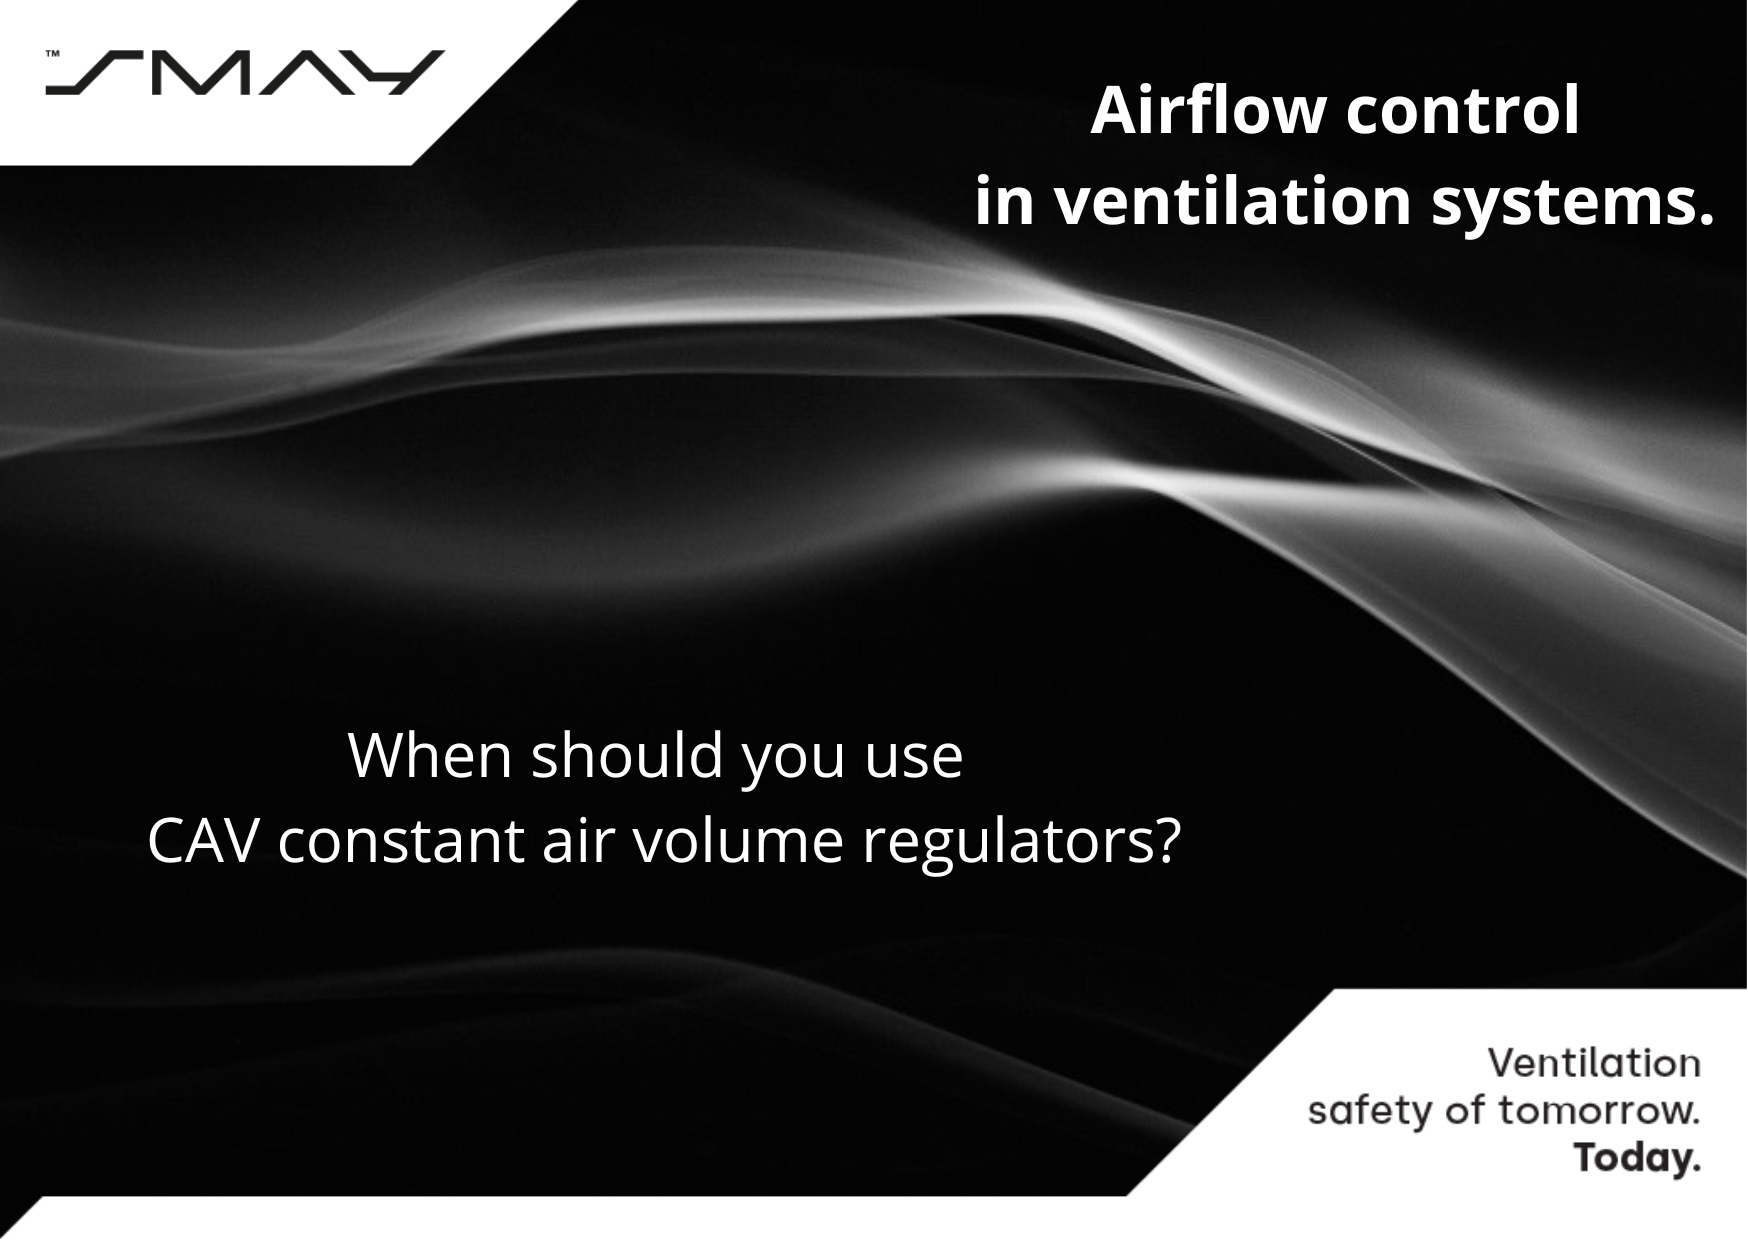 Airflow control in ventilation systems.